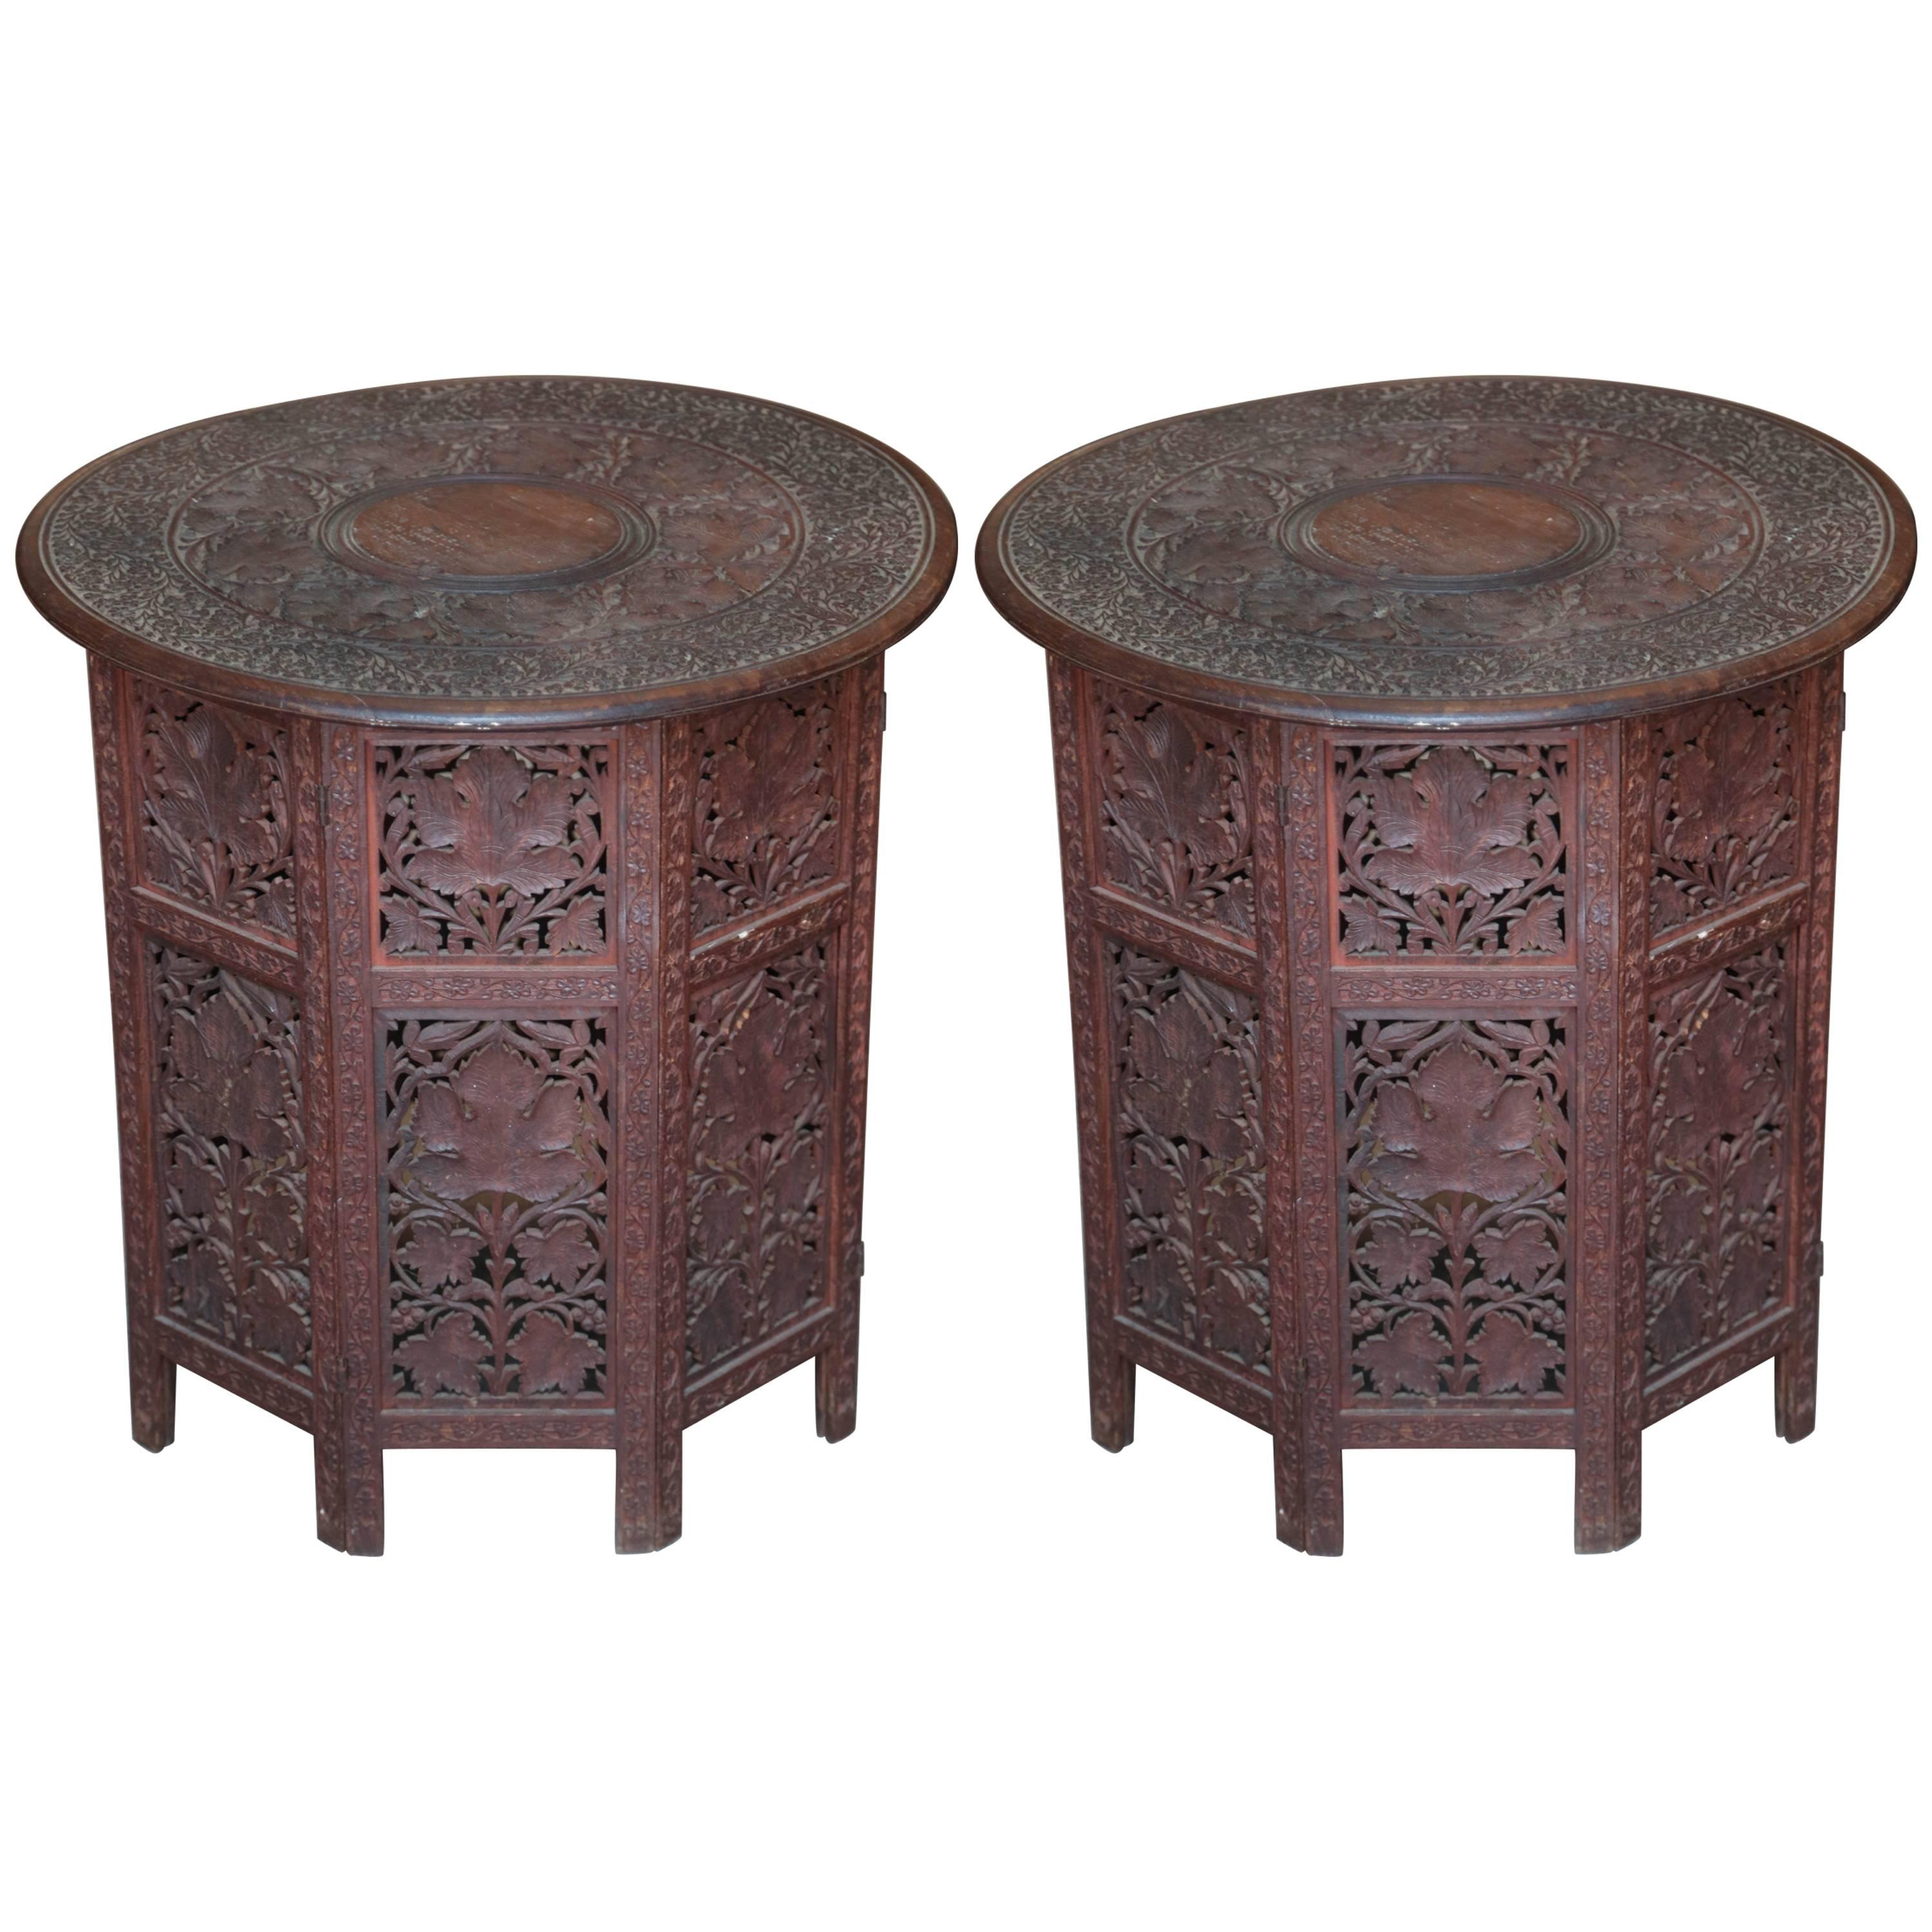 Superb Pair of Large Scale 19th Century Anglo-Indian Travel Tables